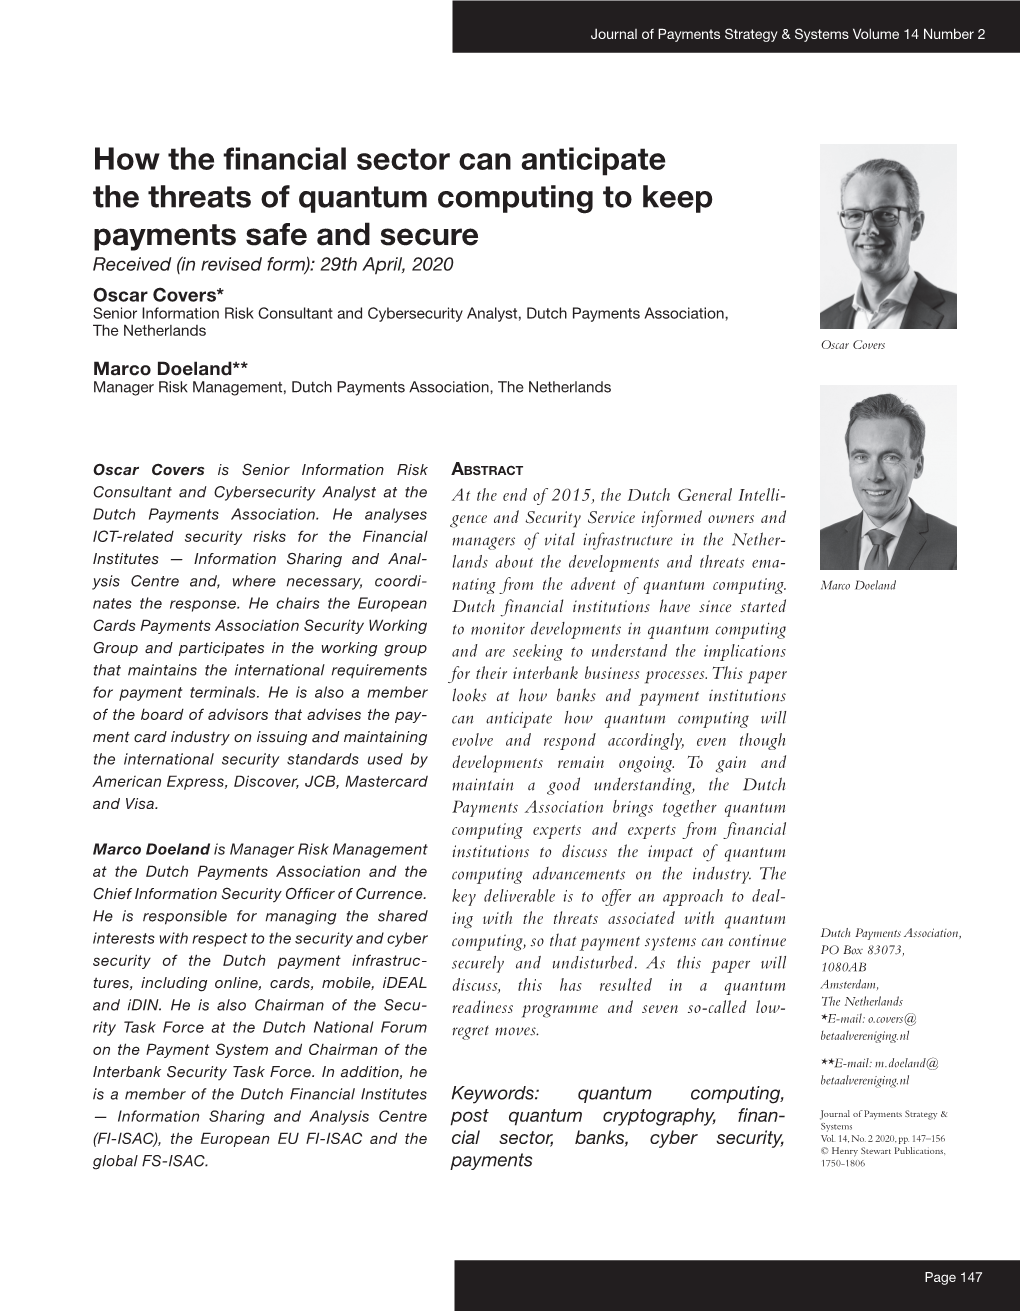 How the Financial Sector Can Anticipate the Threats of Quantum Computing to Keep Payments Safe and Secure